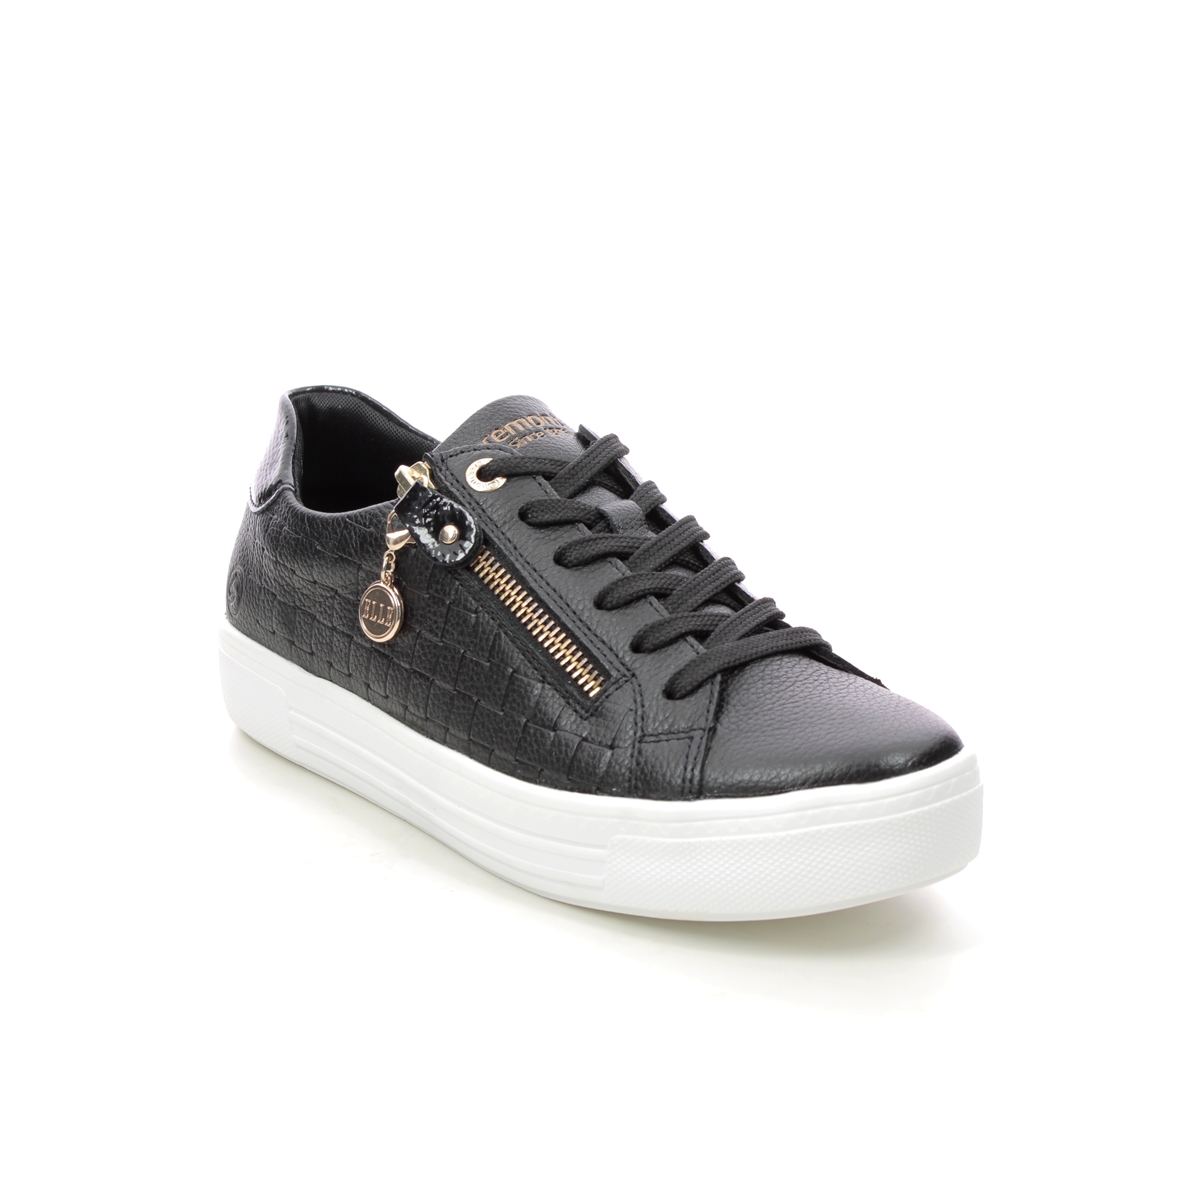 Remonte Altozip Elle Black Leather Womens Trainers D0916-00 In Size 41 In Plain Black Leather